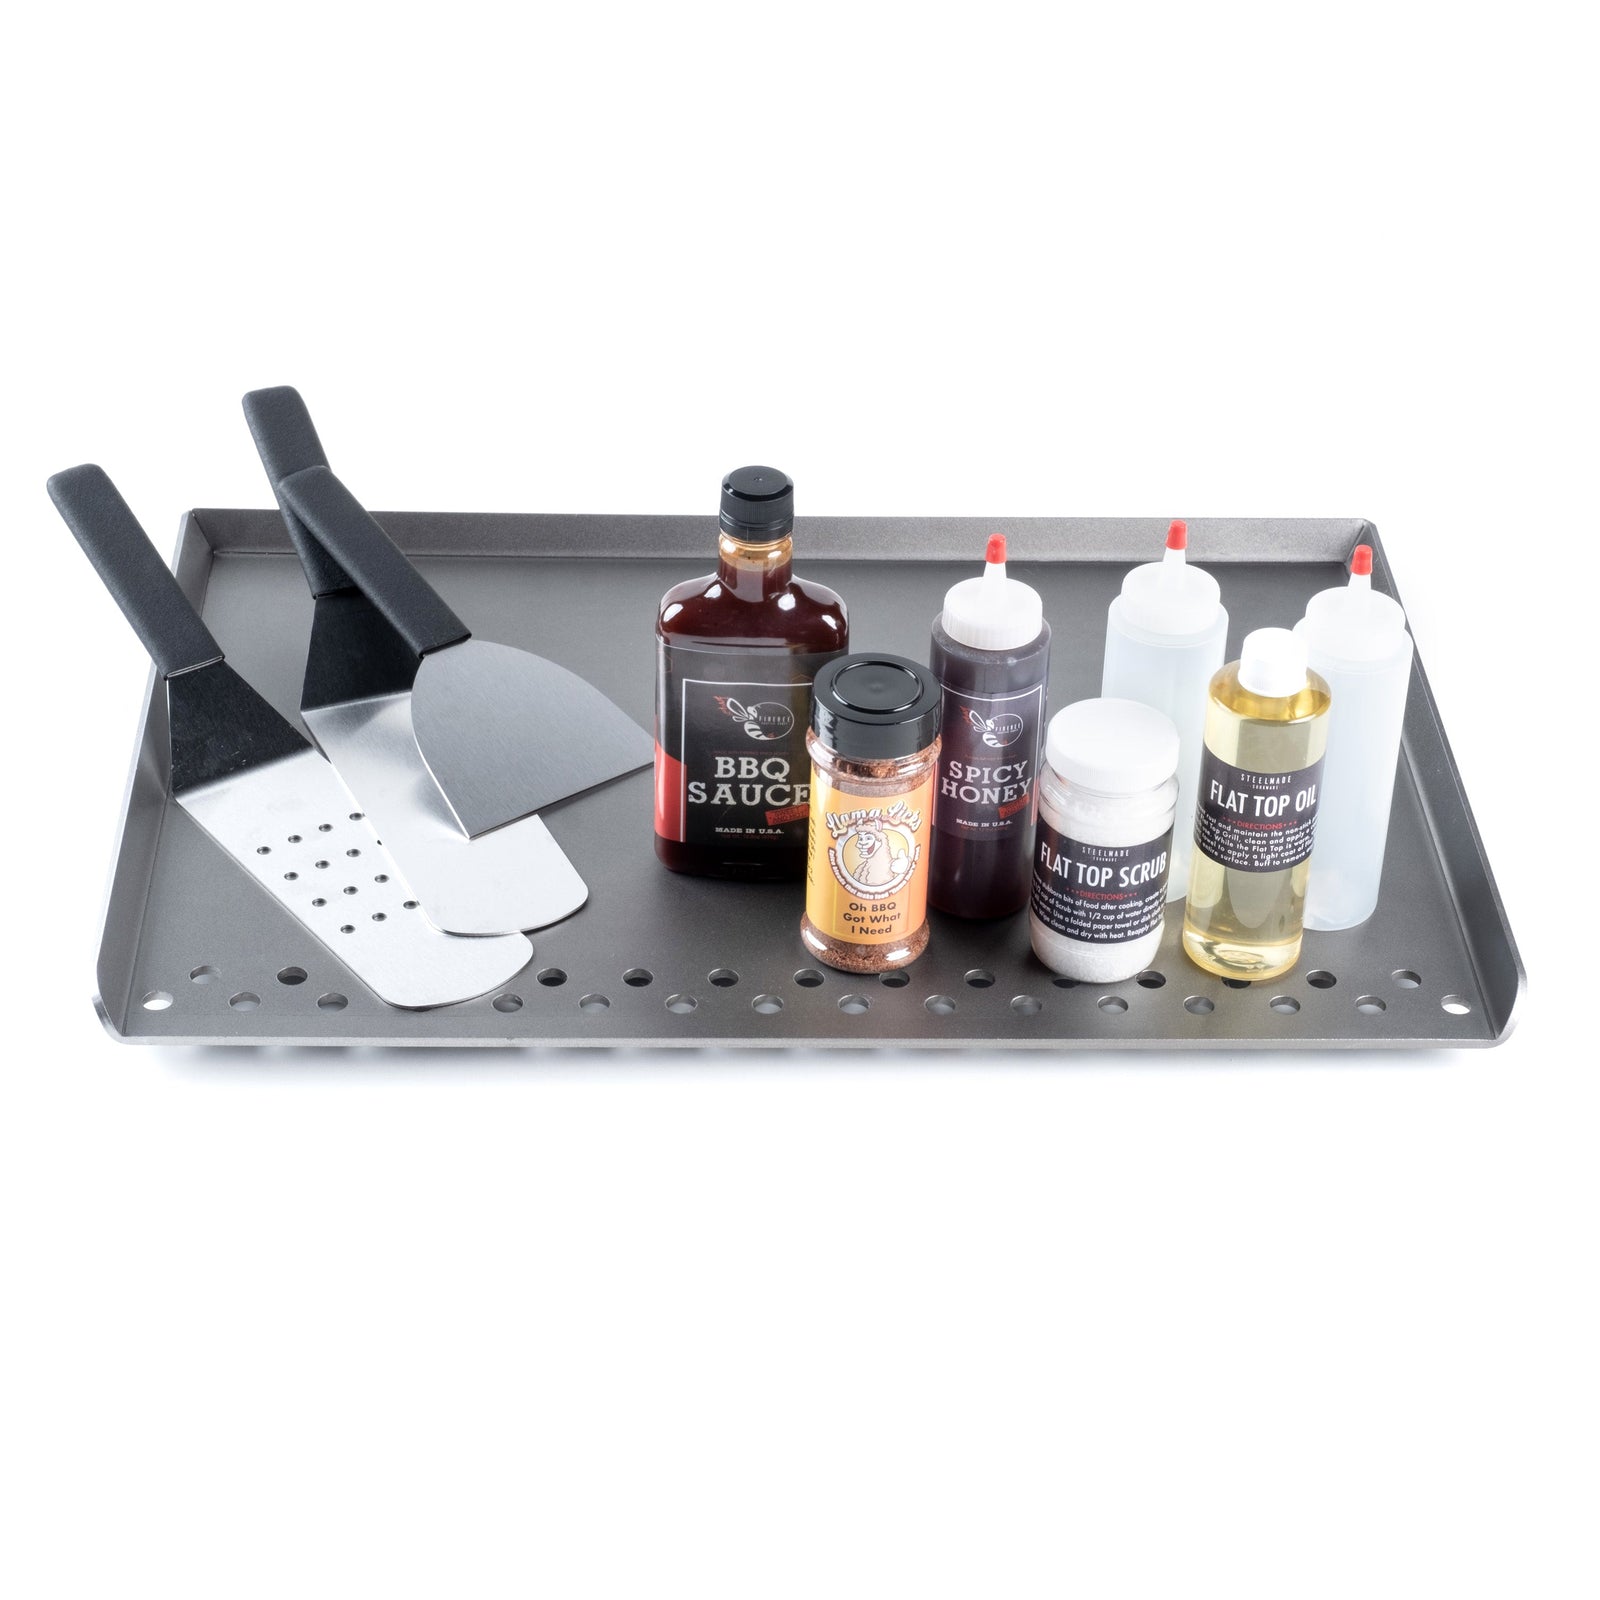 Griddle Insert For Charcoal Grills - Steelmade